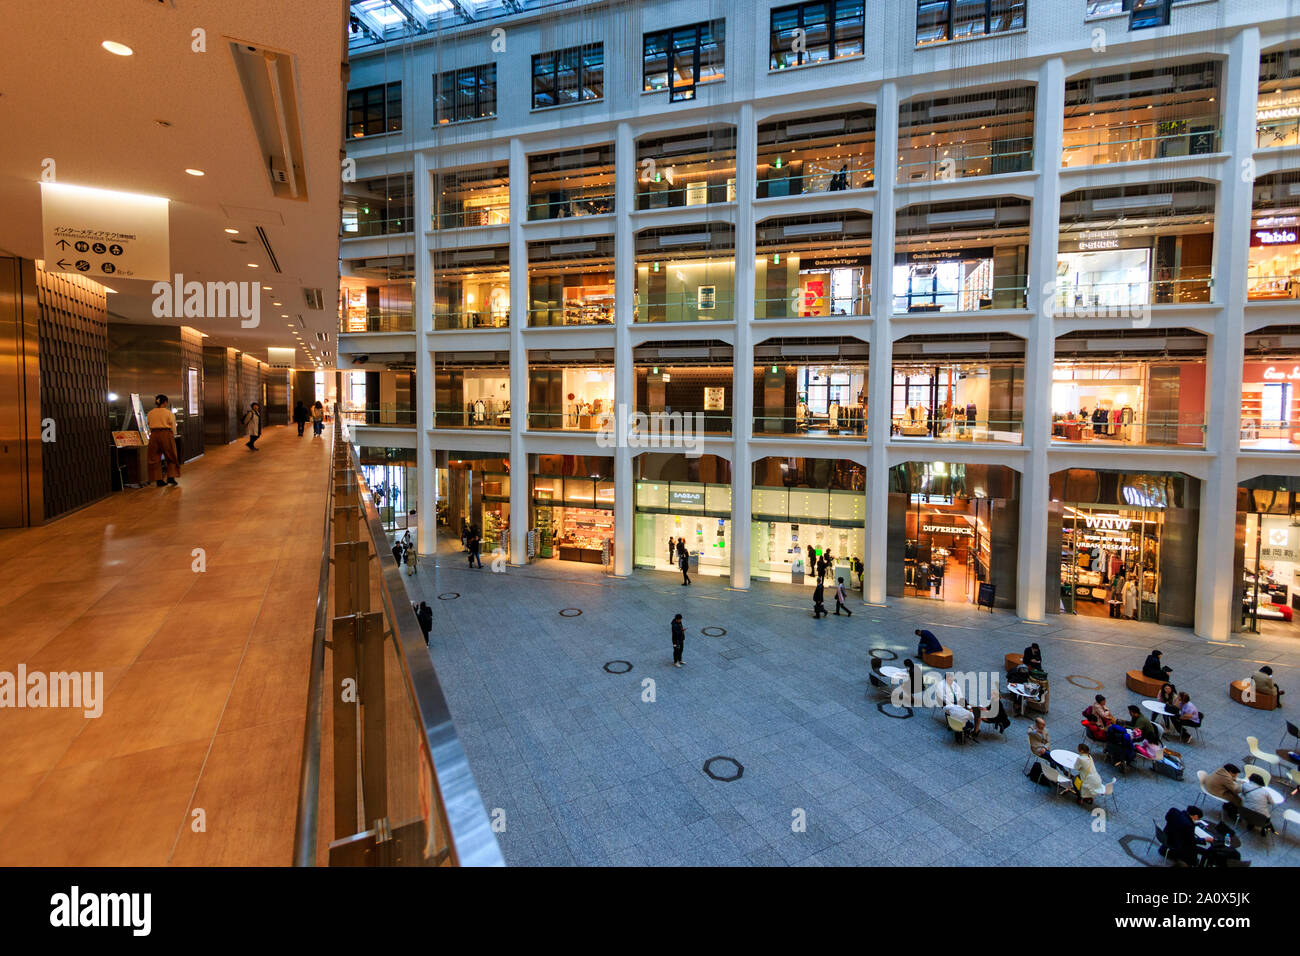 Tokyo, Marunouchi. JP tower KITTE building interior. The triangular atrium, aisle, shops and ground floor seating area with people sitting. Daytime. Stock Photo